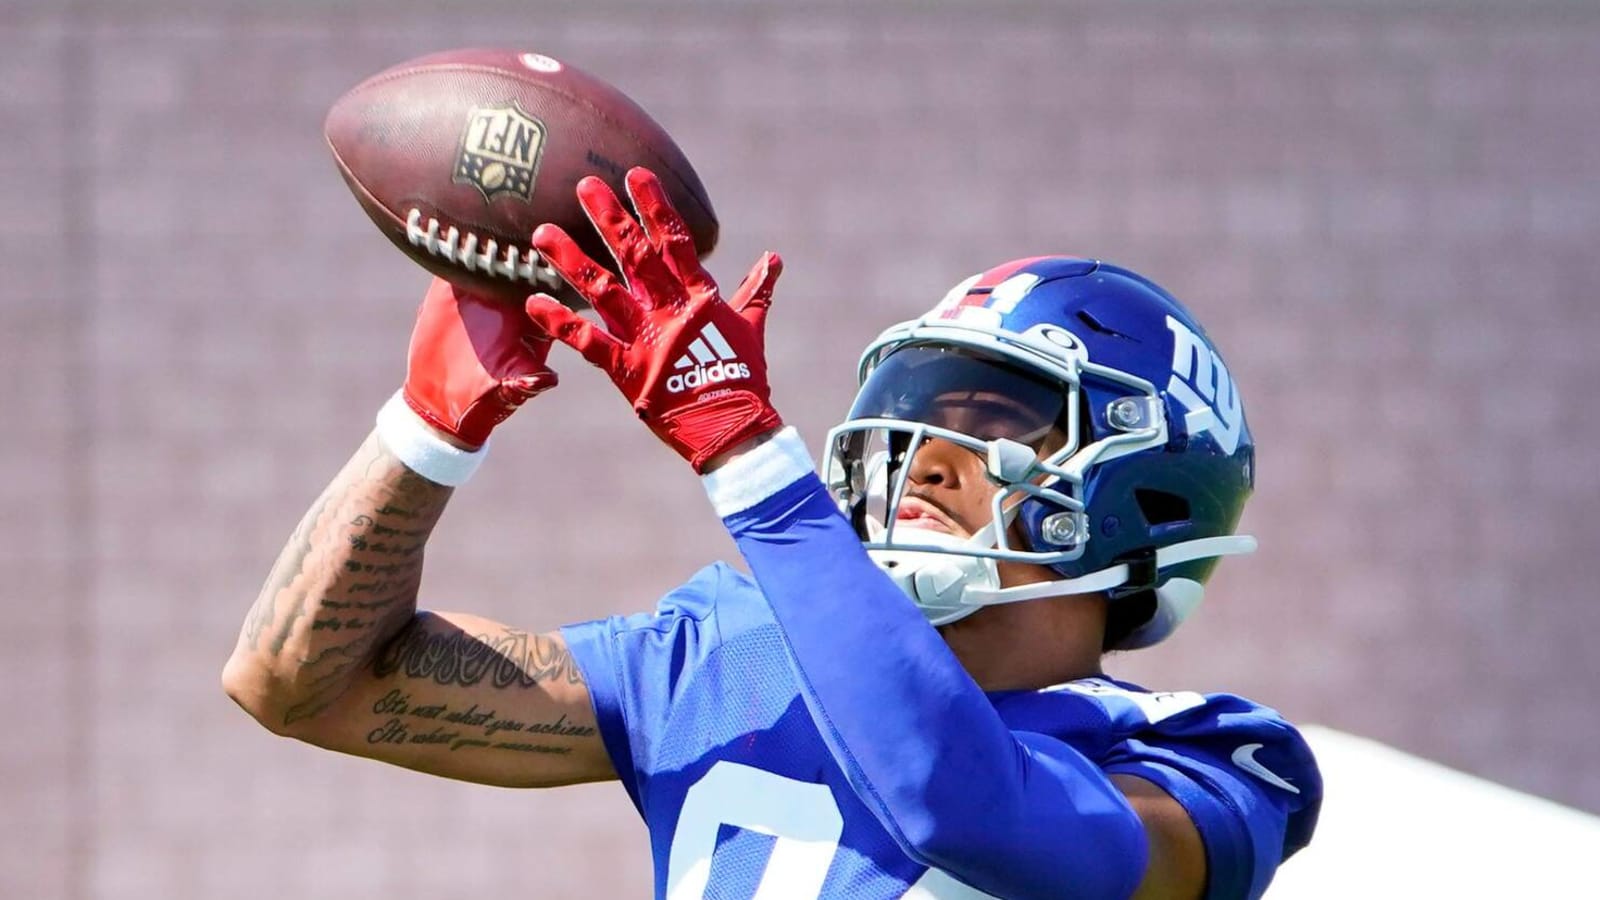 Giants rookie reportedly breaks NFL record during camp